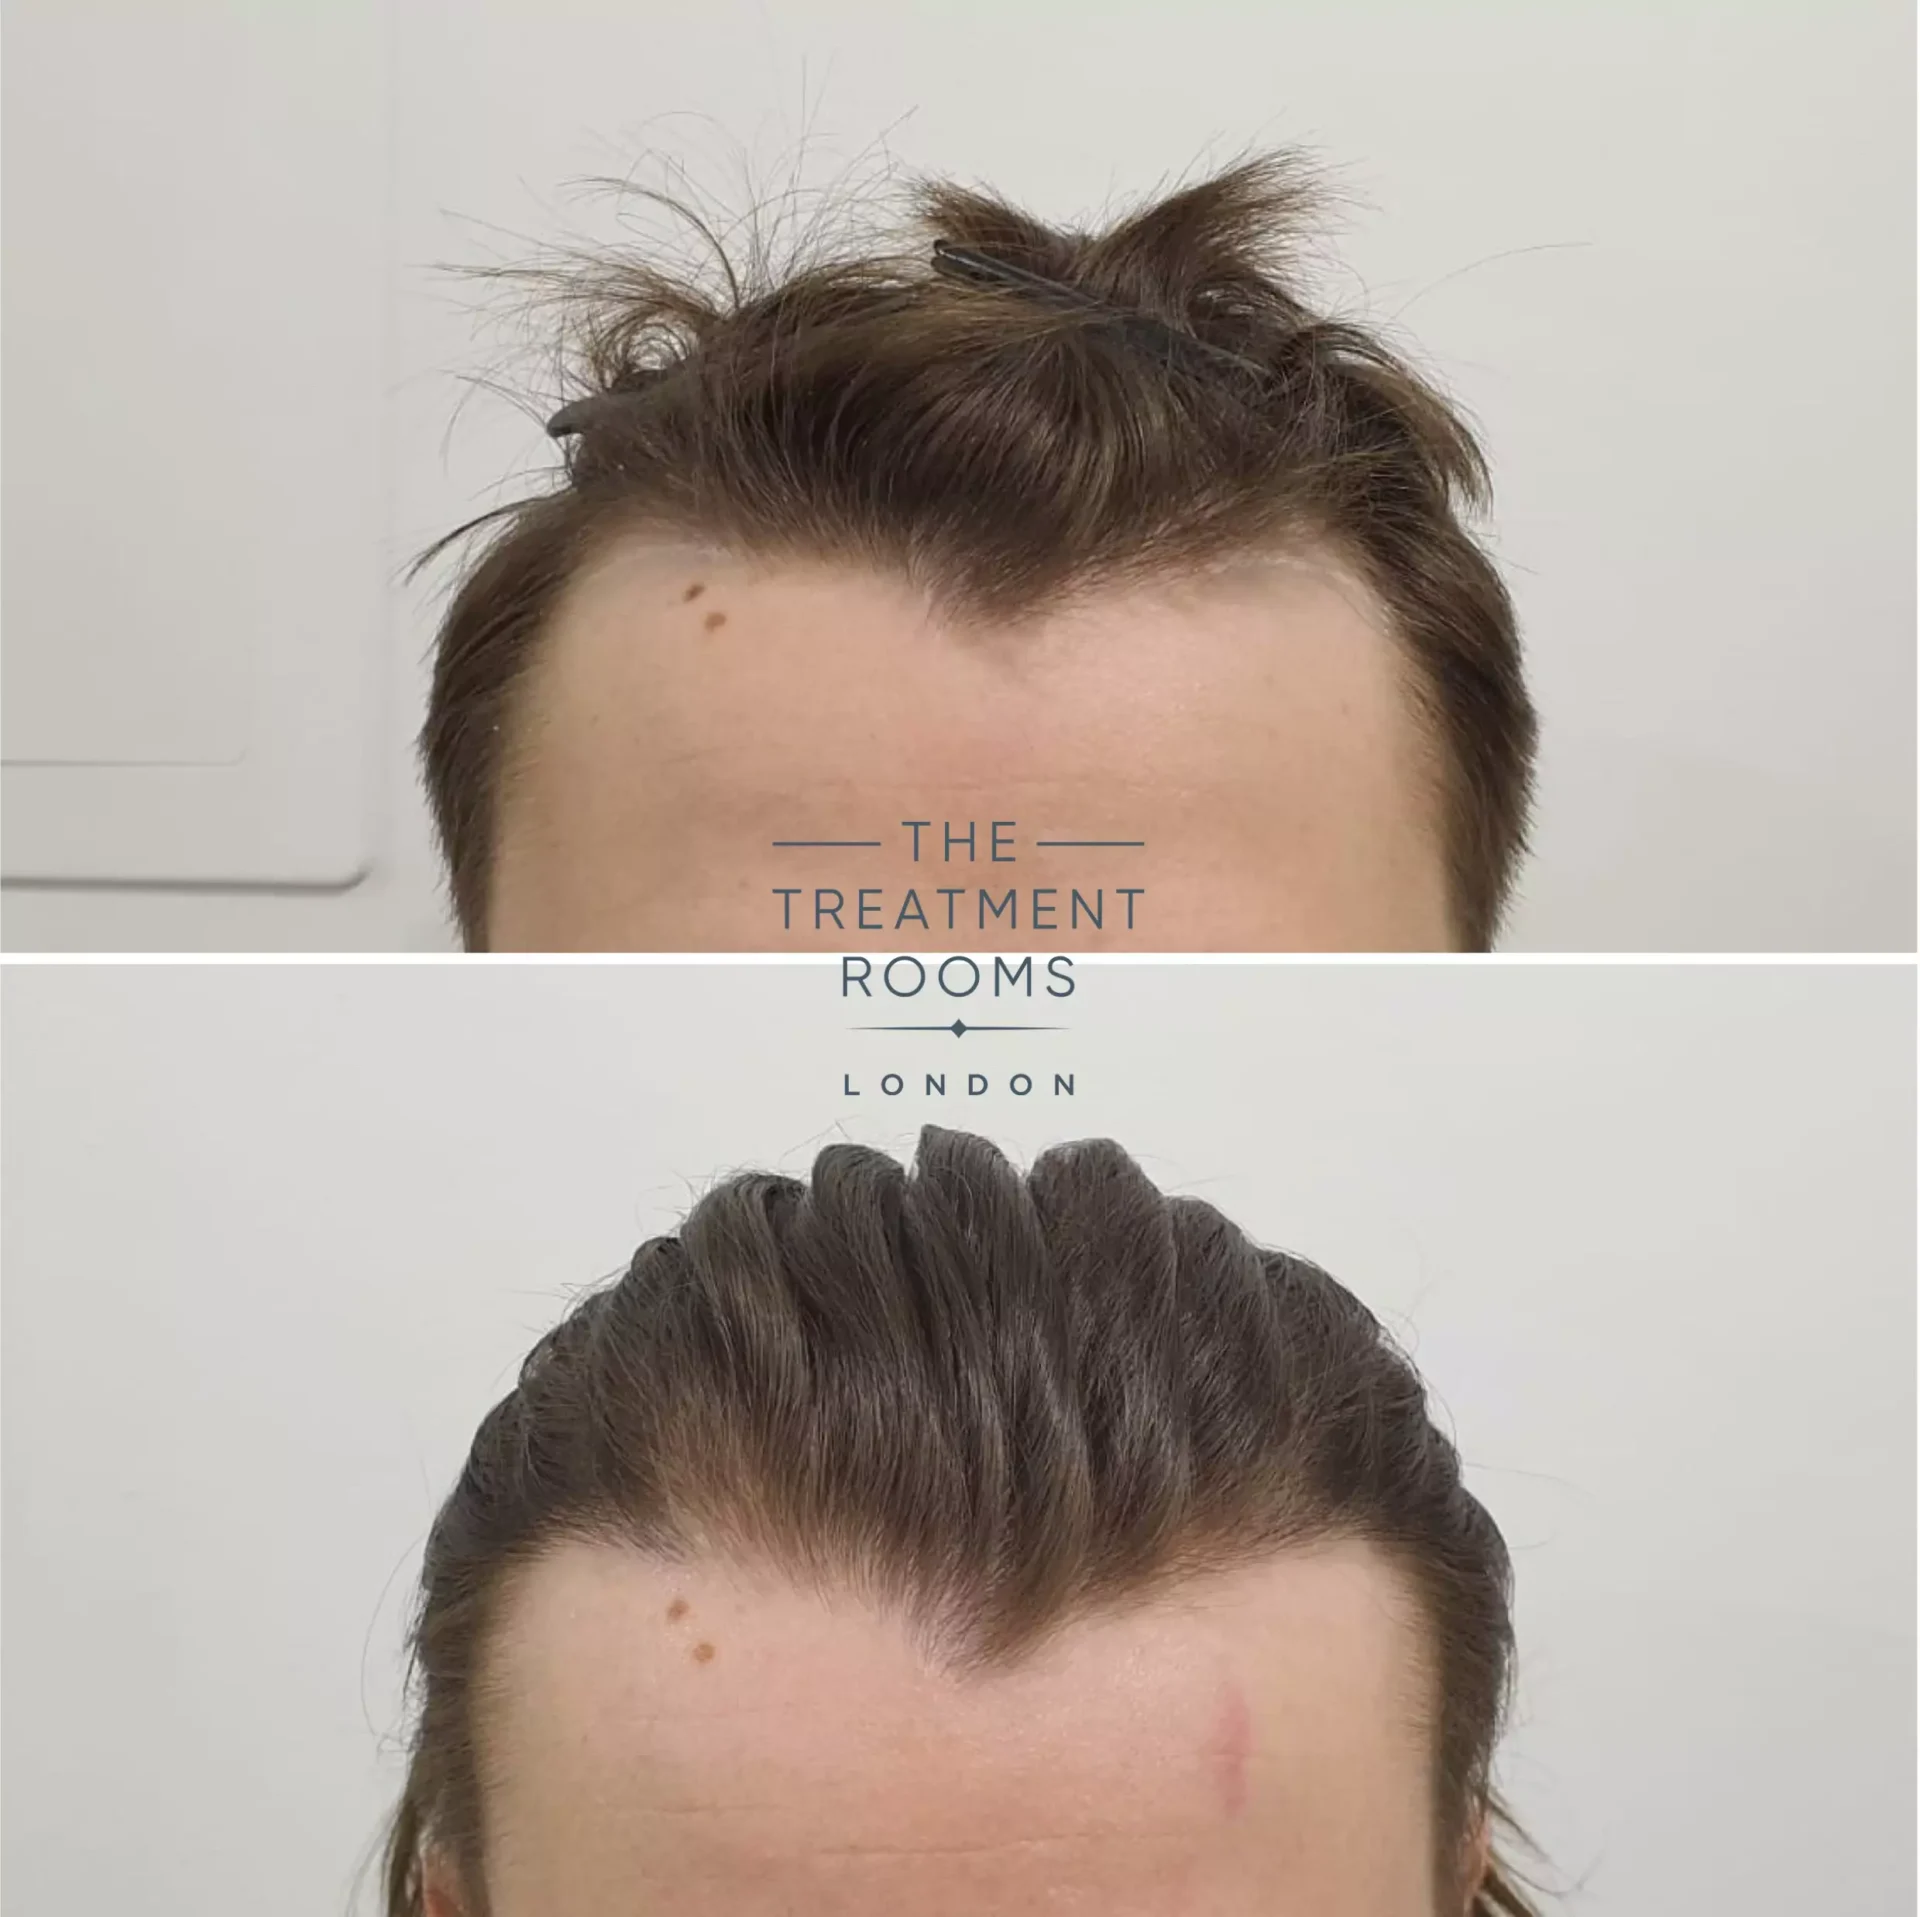 temple hair transplant london 600 grafts before and after